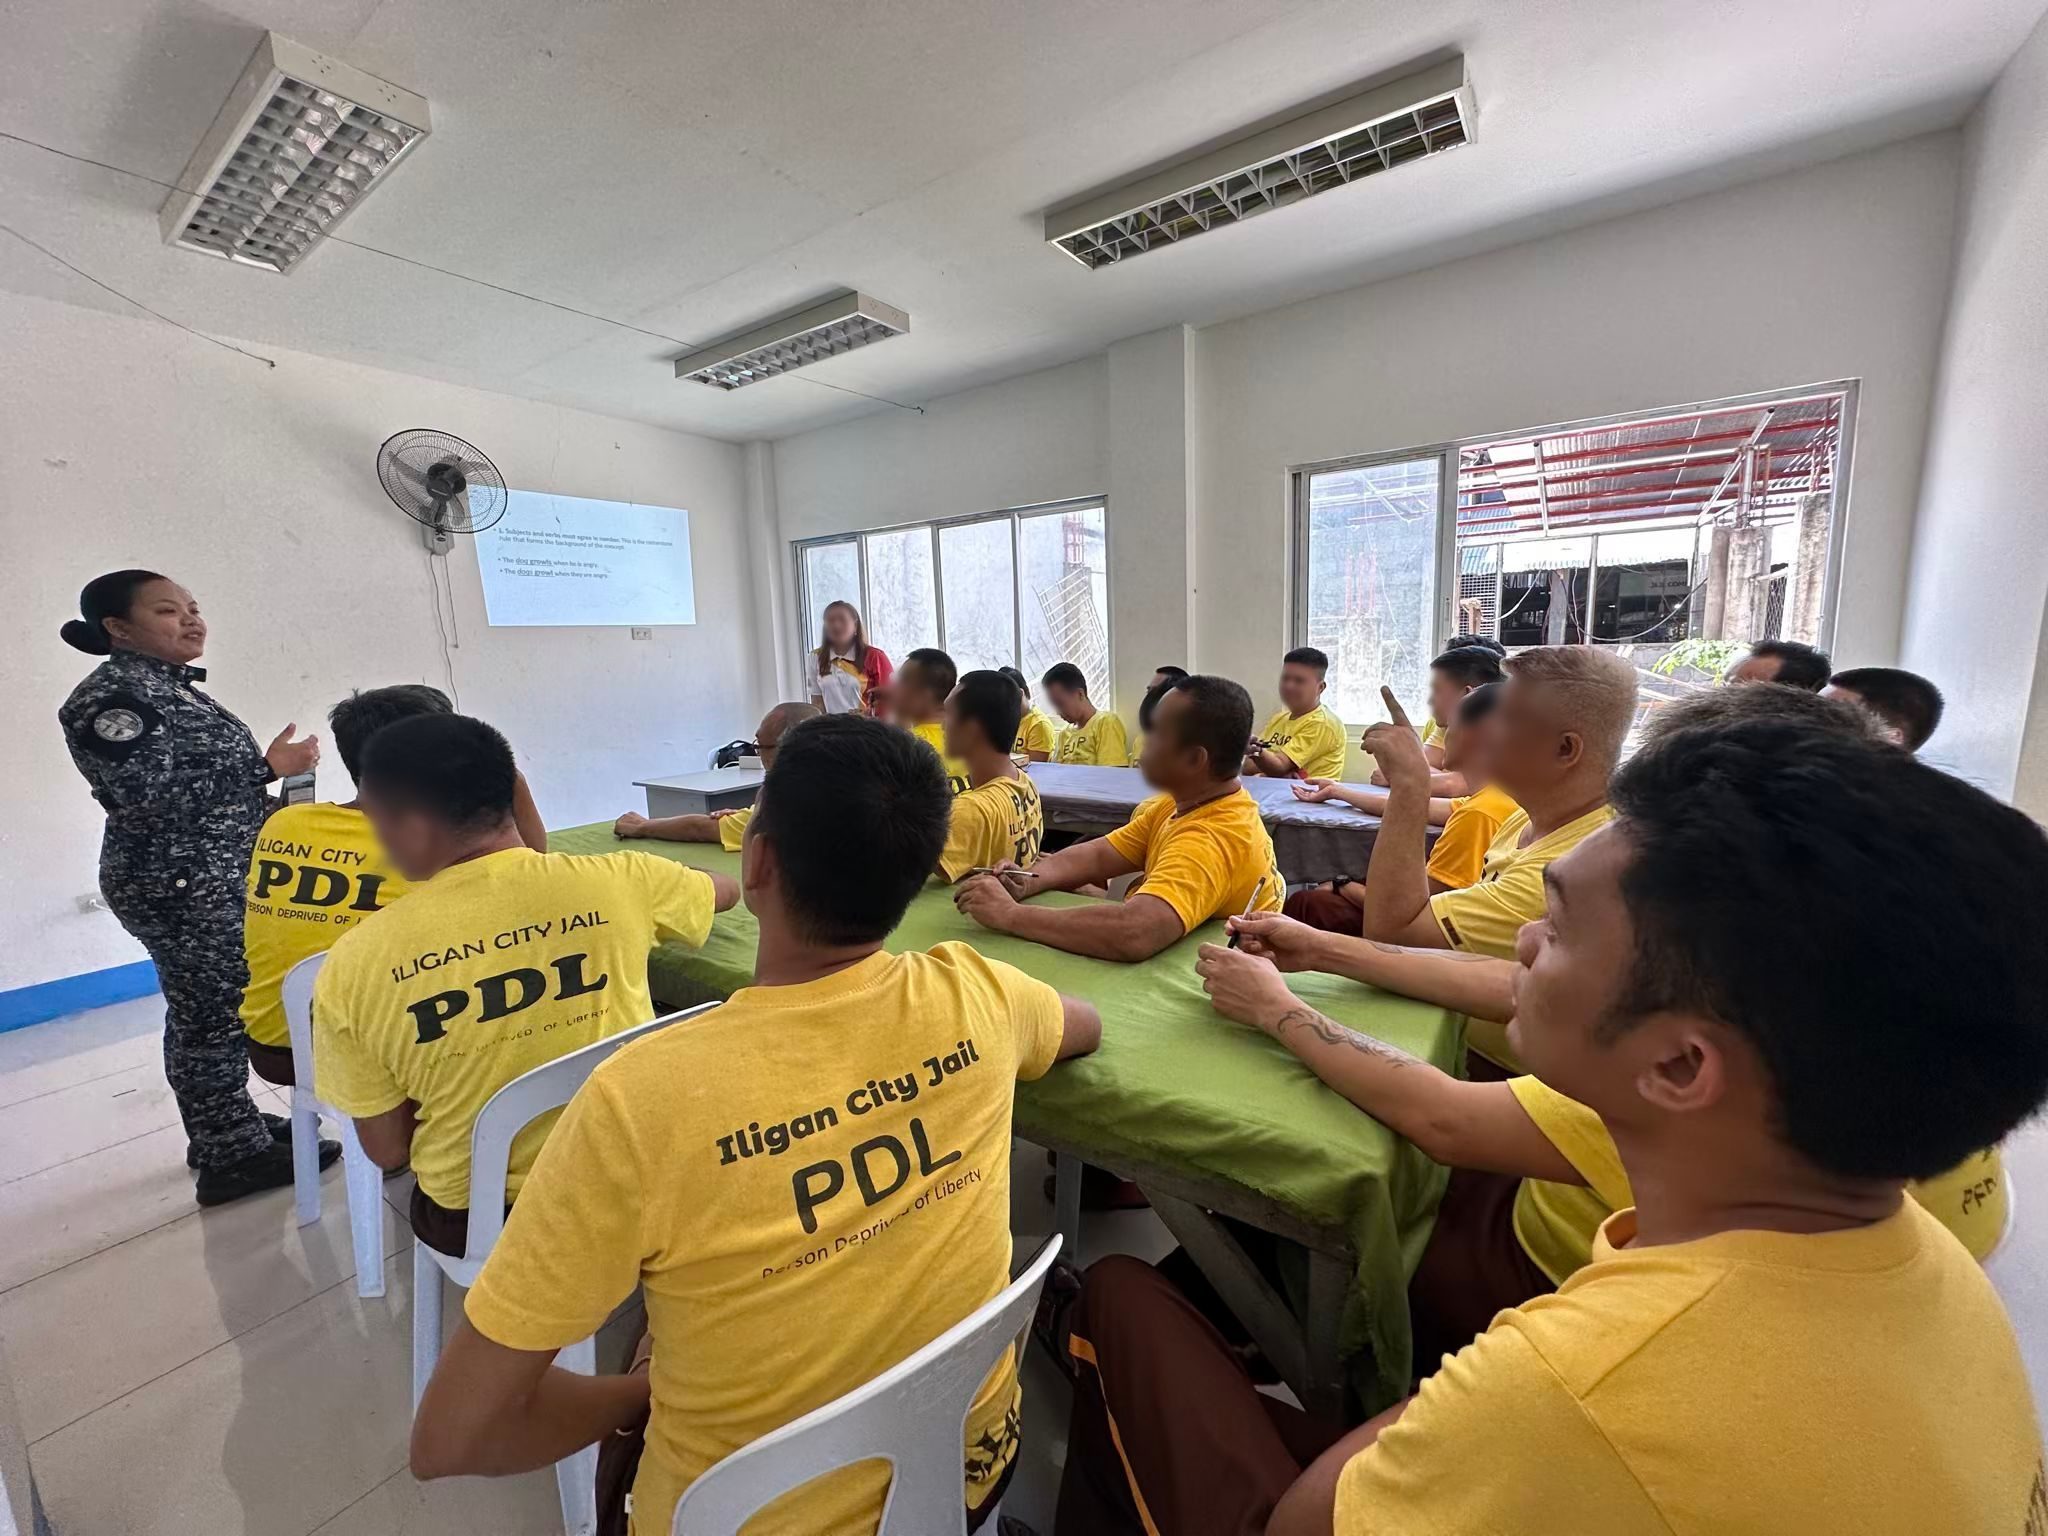 State university’s special courses bring hope to Iligan inmates